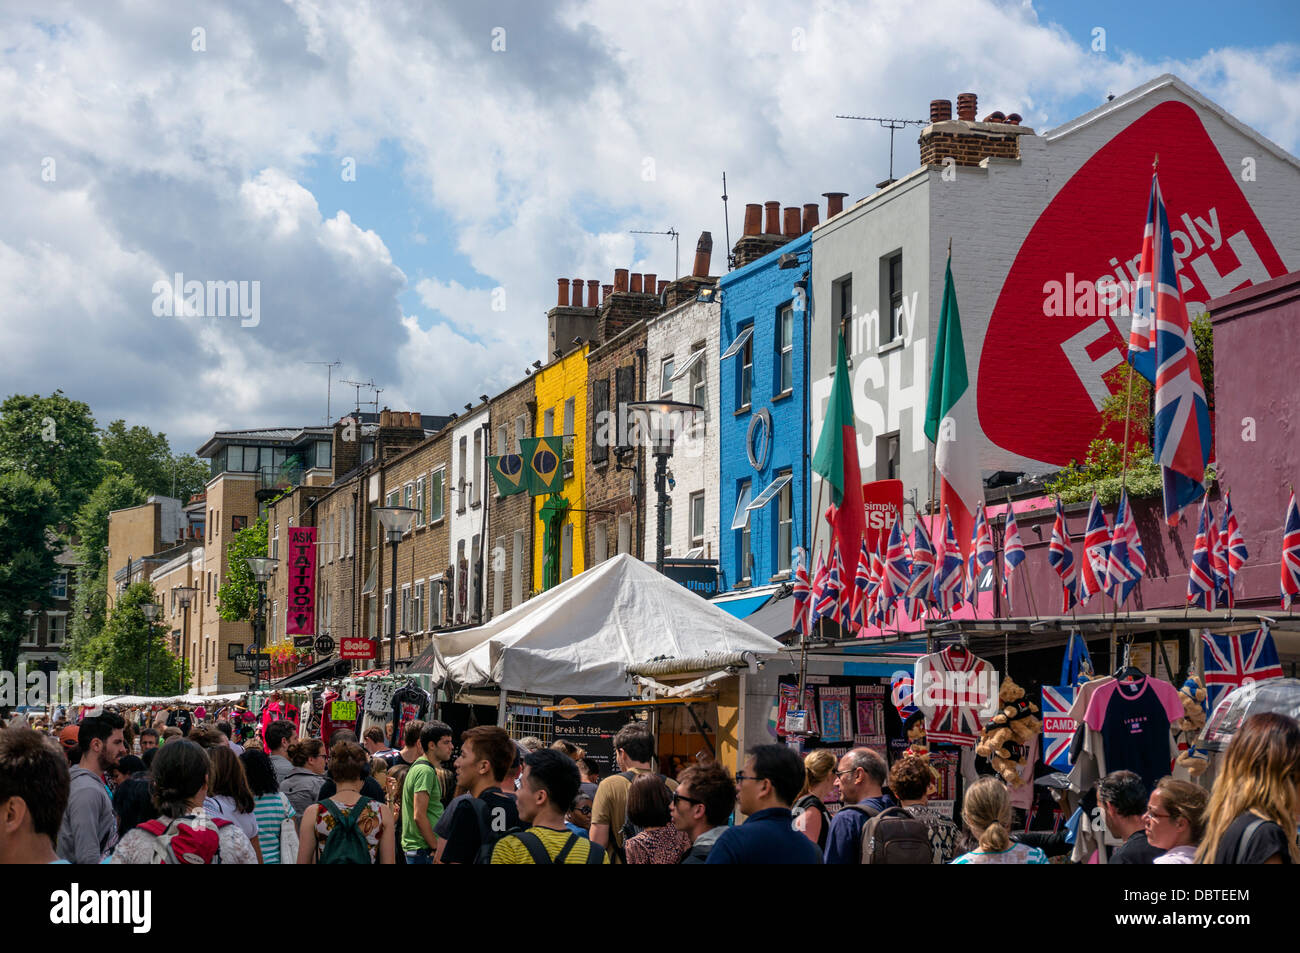 Inverness Street market, with its colourful buildings and crowded with people, near Camden Market, London, England, UK. Stock Photo